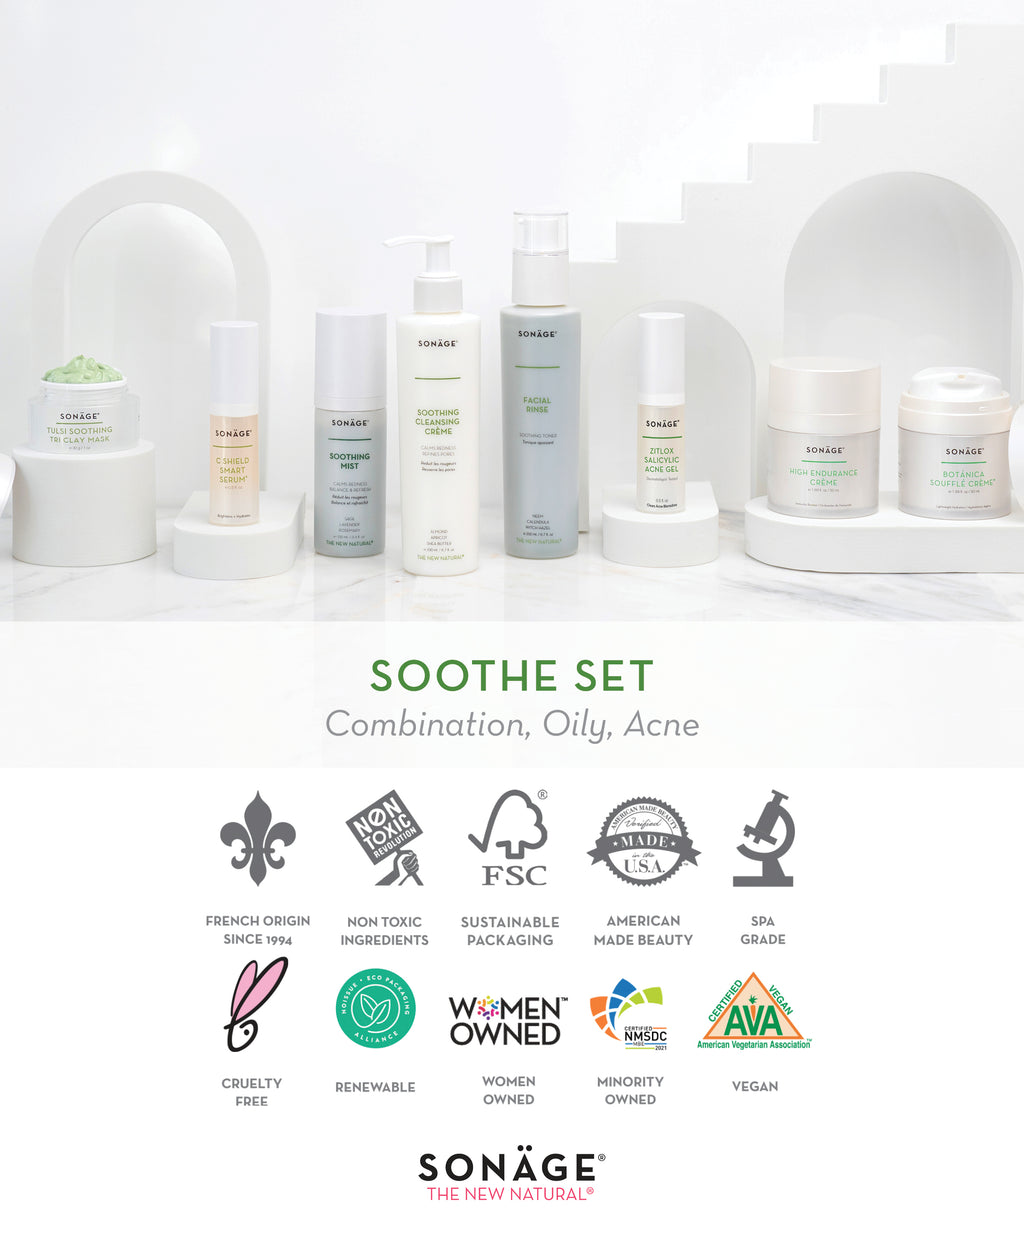 Sonage Soothe Kit for Acne and Hyperpigmentation